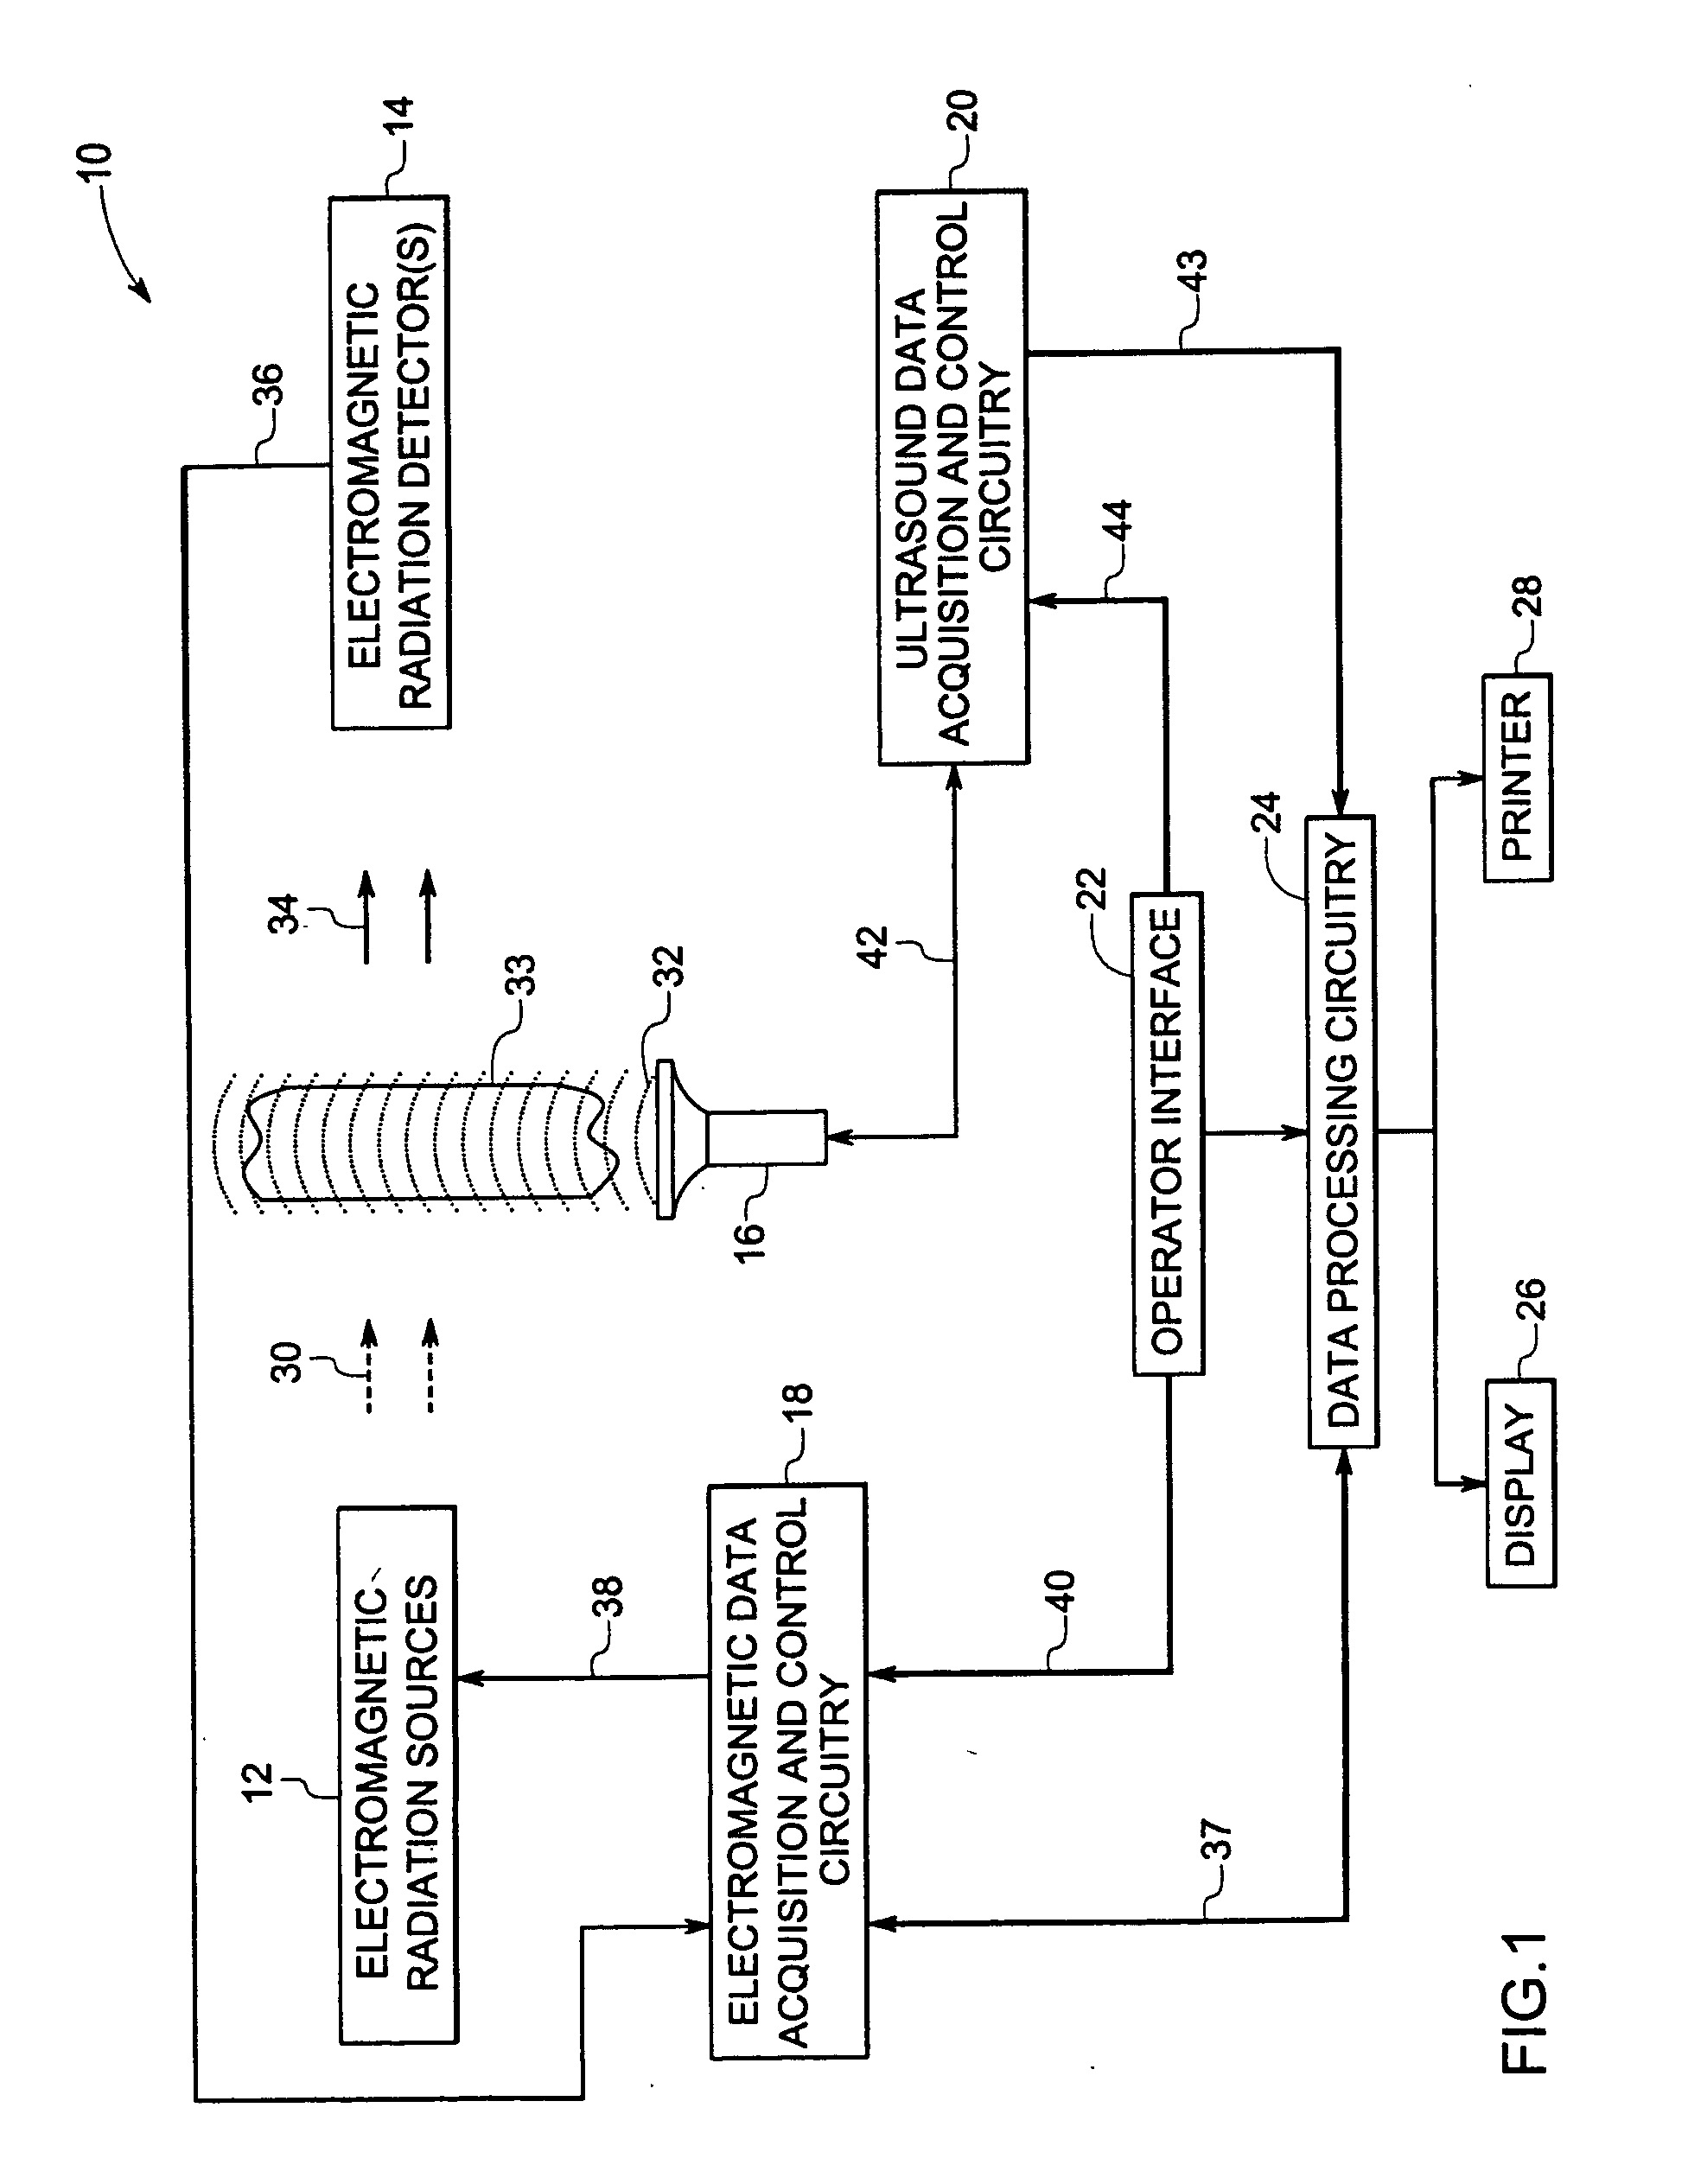 Method and apparatus for imaging of tissue using multi-wavelength ultrasonic tagging of light